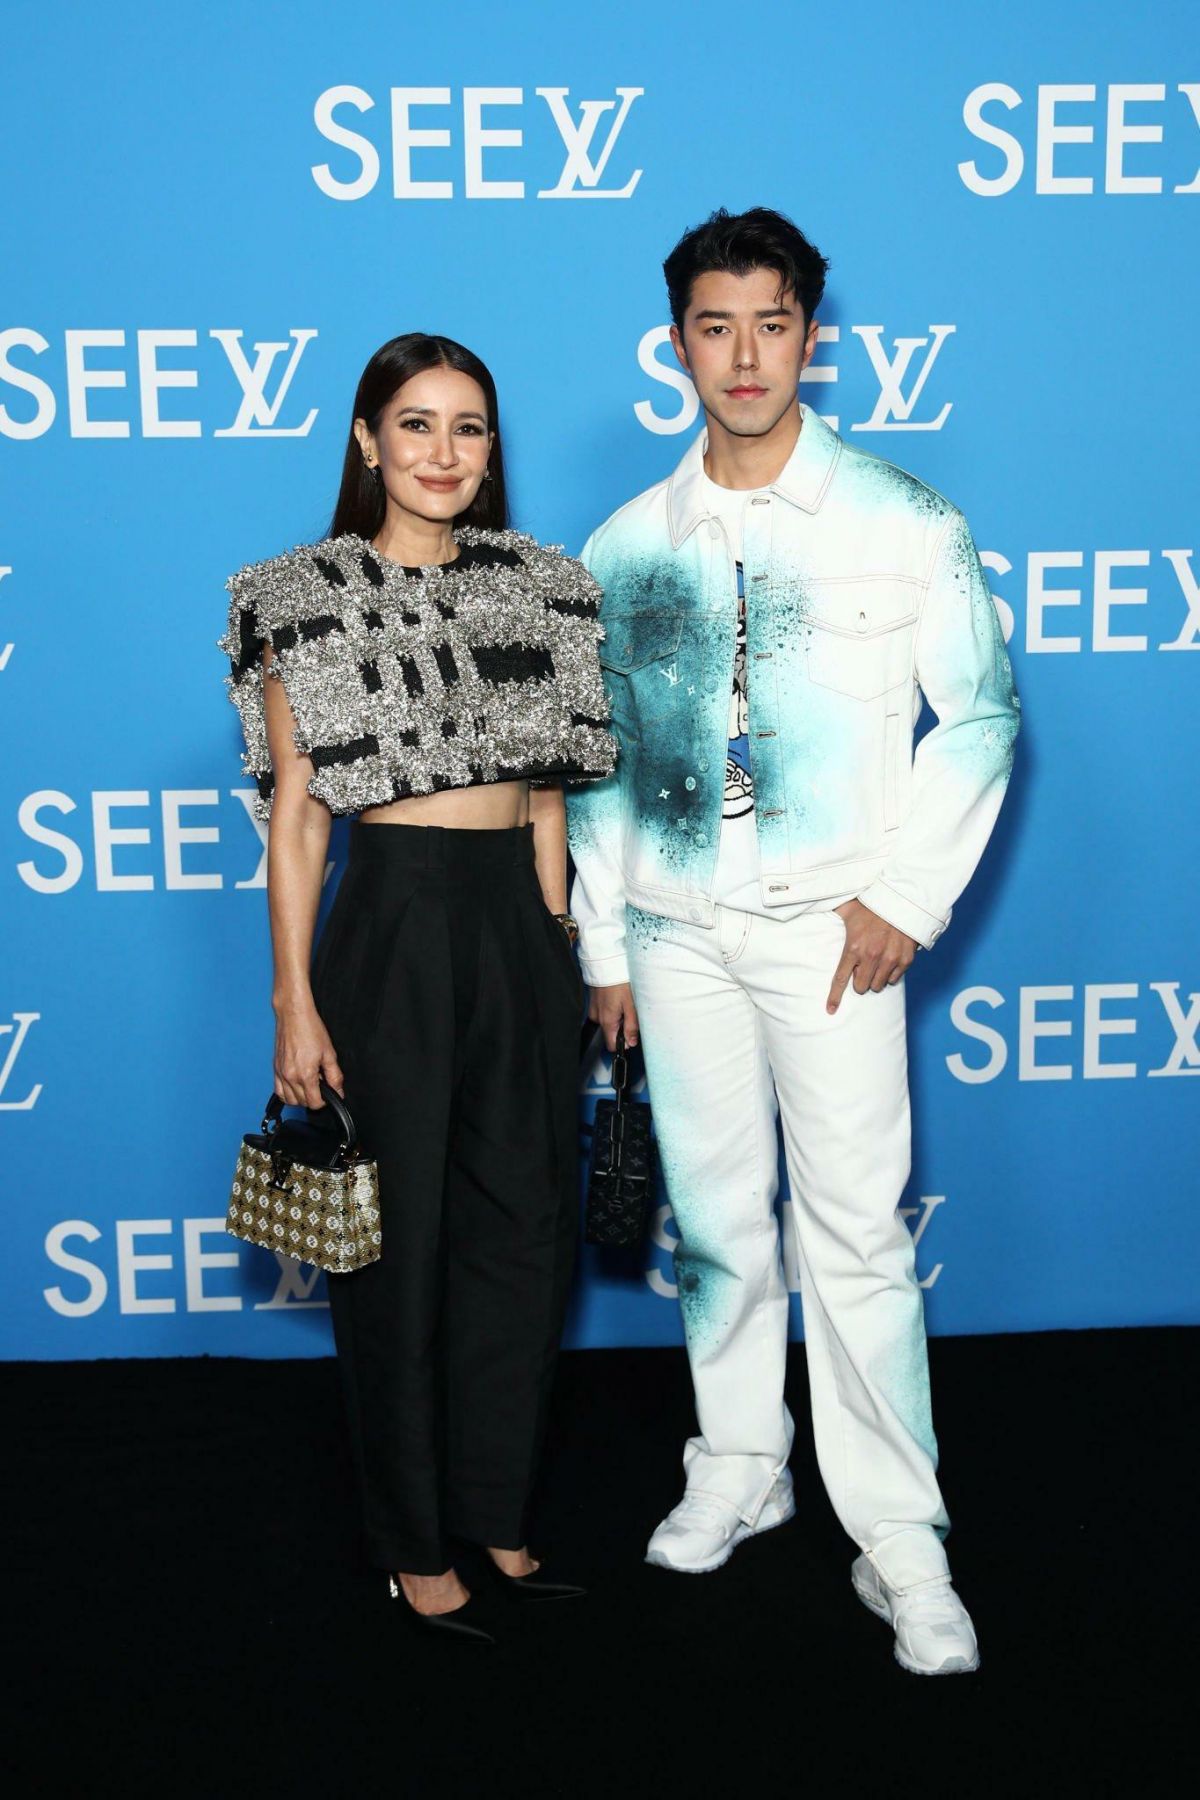 Ann Thongprasom and Naphat Siangsomboon at Louis Vuitton SEE LV Exhibition Opening in Sydney